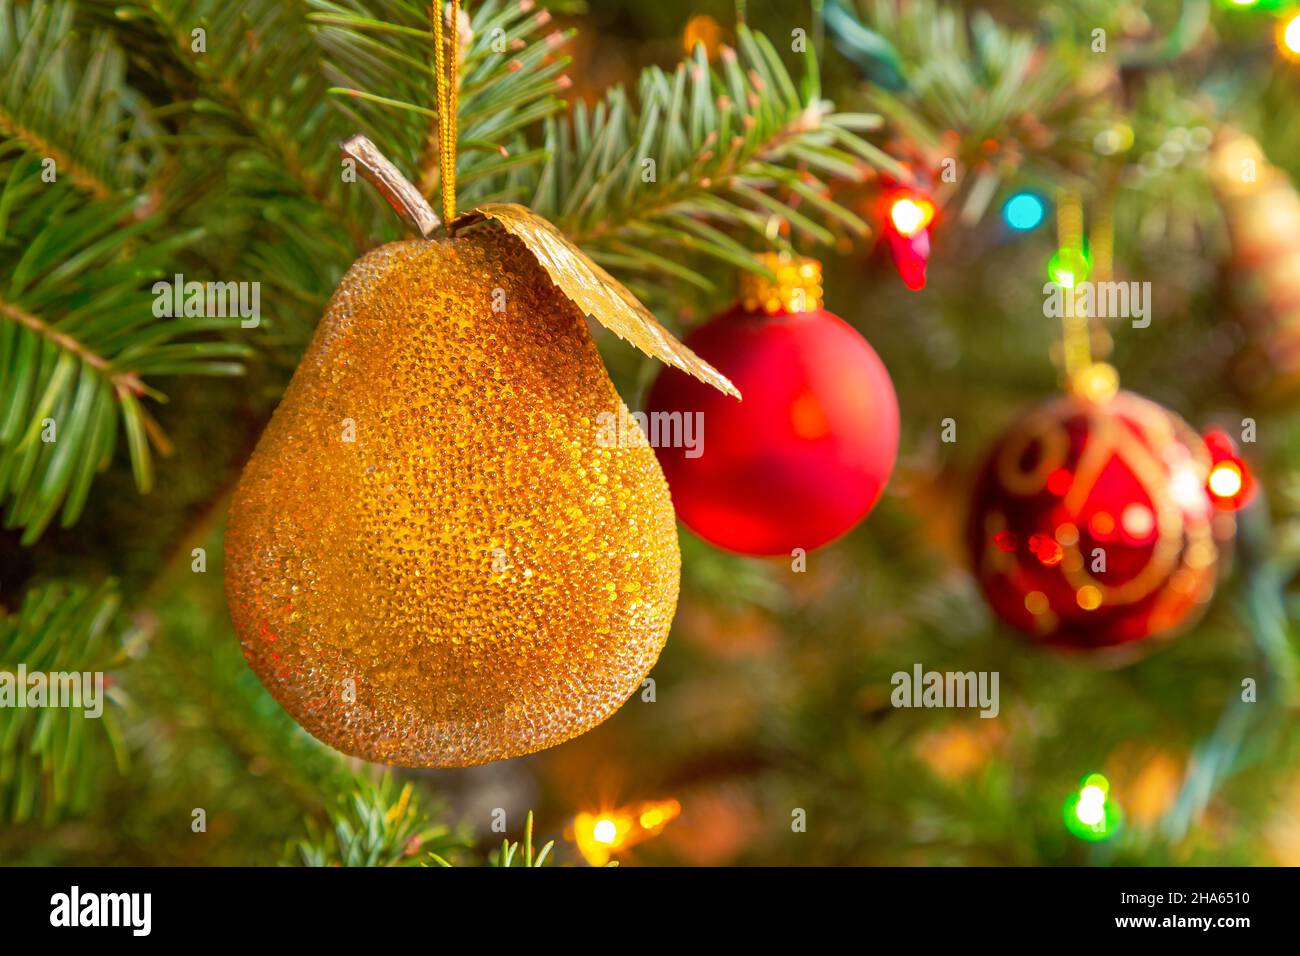 Sparkling glass pear hanging on a Christmas tree. Stock Photo